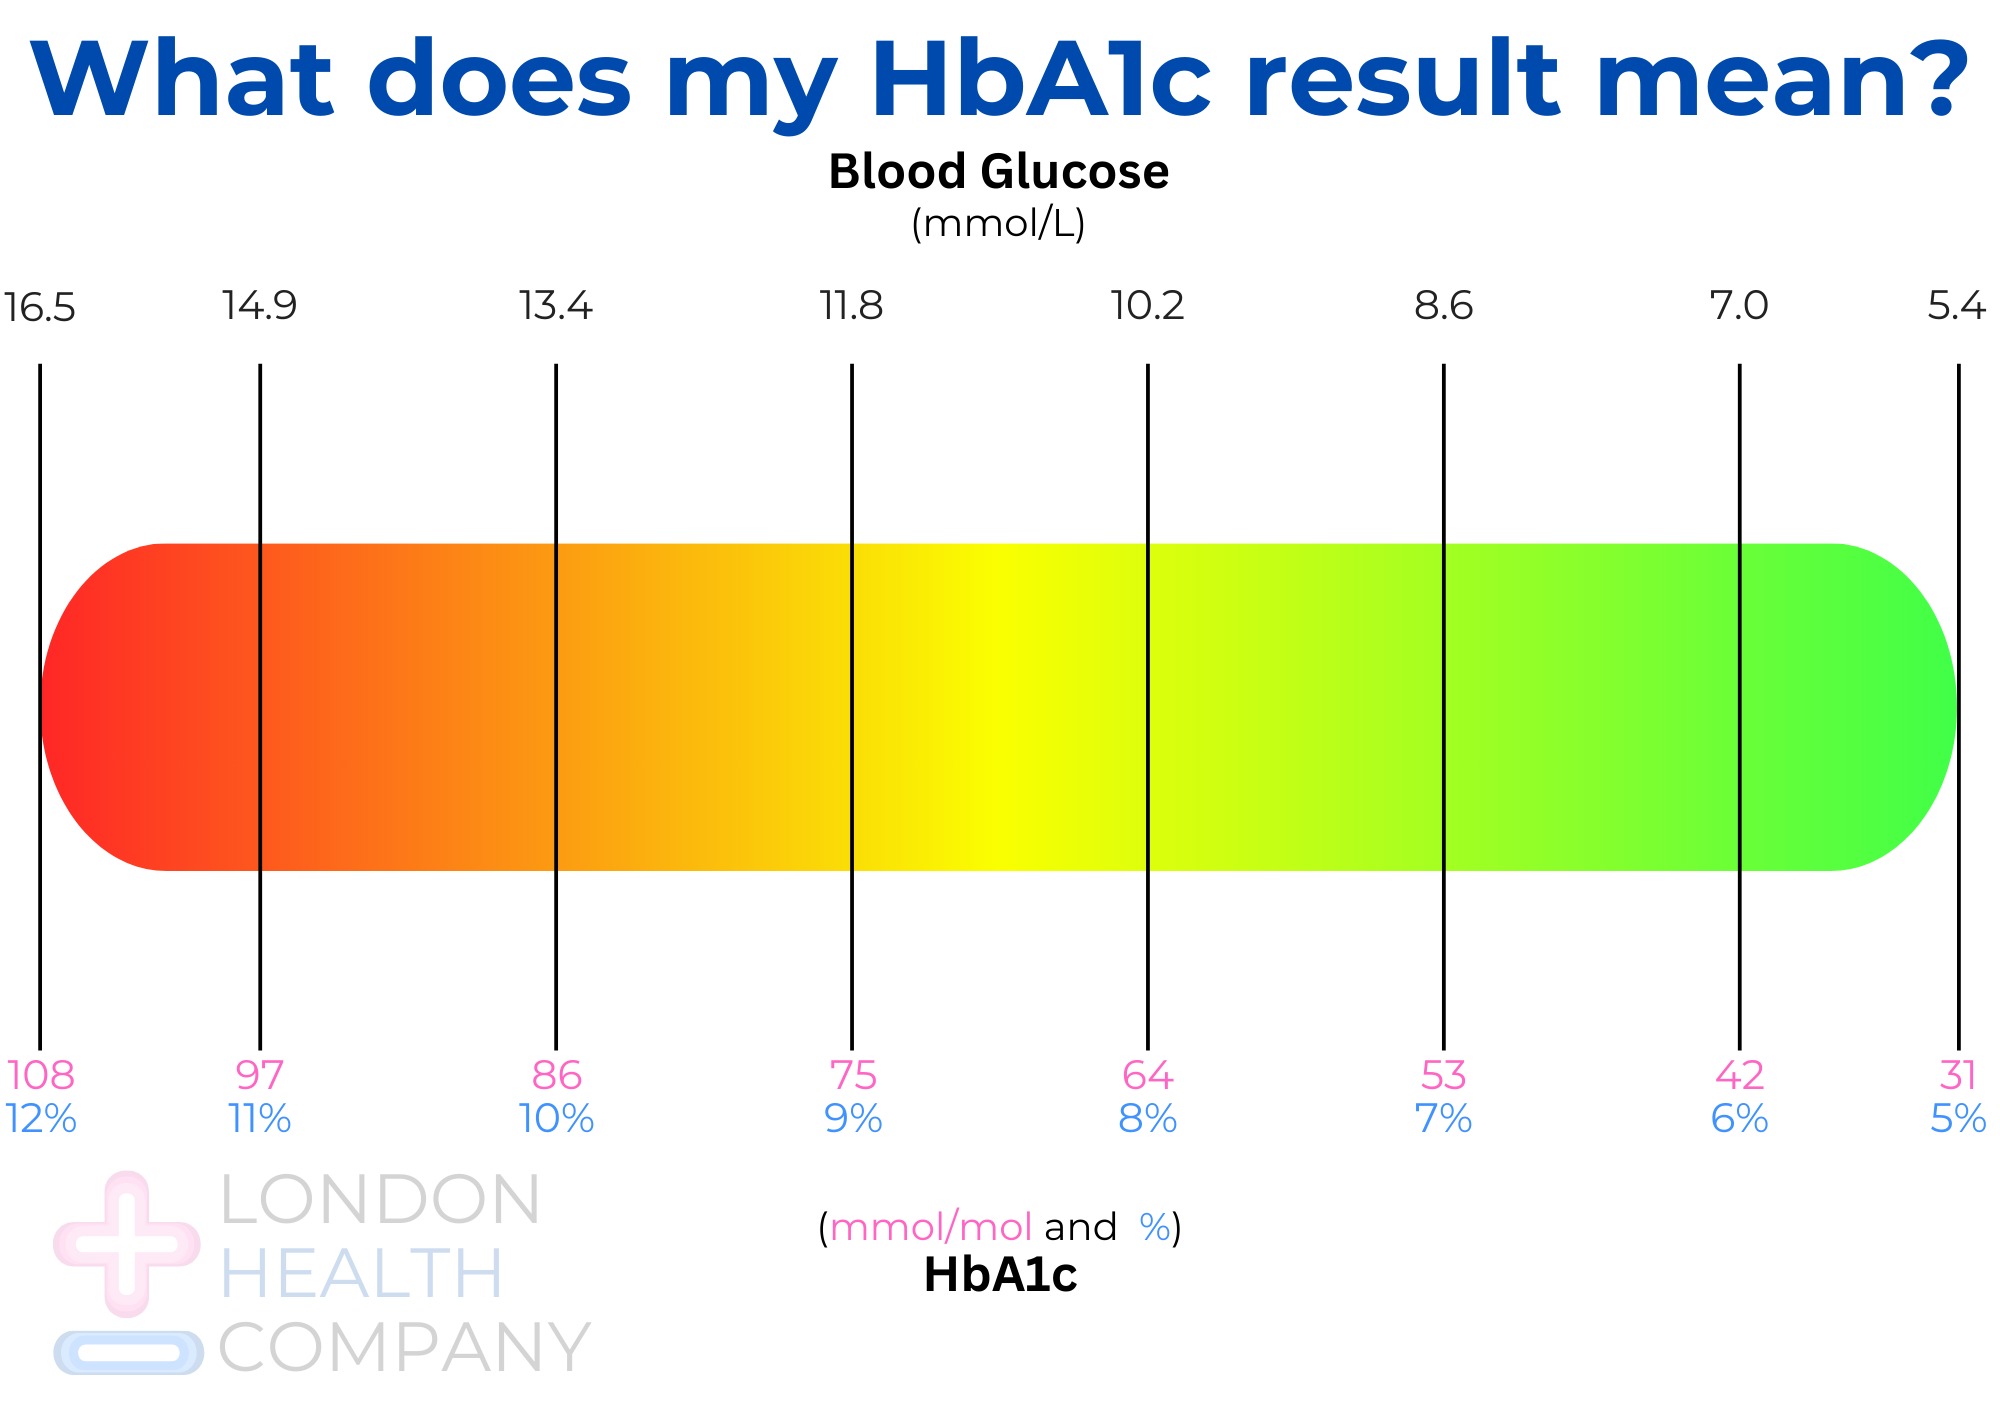 Meaning of am HbA1c result